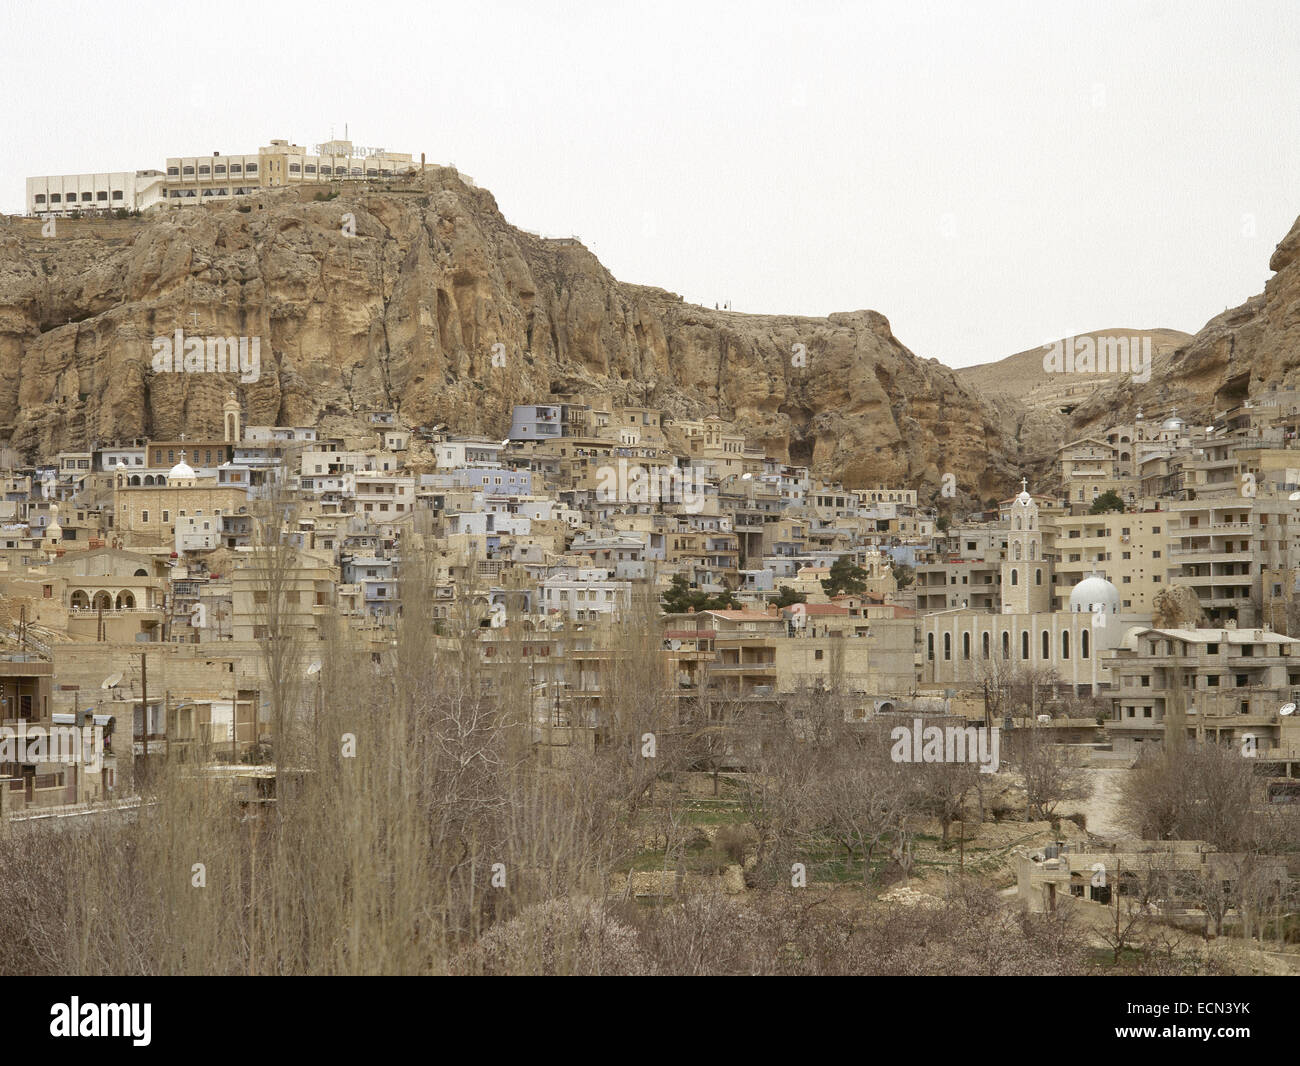 Syria. Ma´loula. Town built into the rugged mountainside. Village where Western Aramaic is still spoken. Near East. Photo before Syrian Civil War. Stock Photo